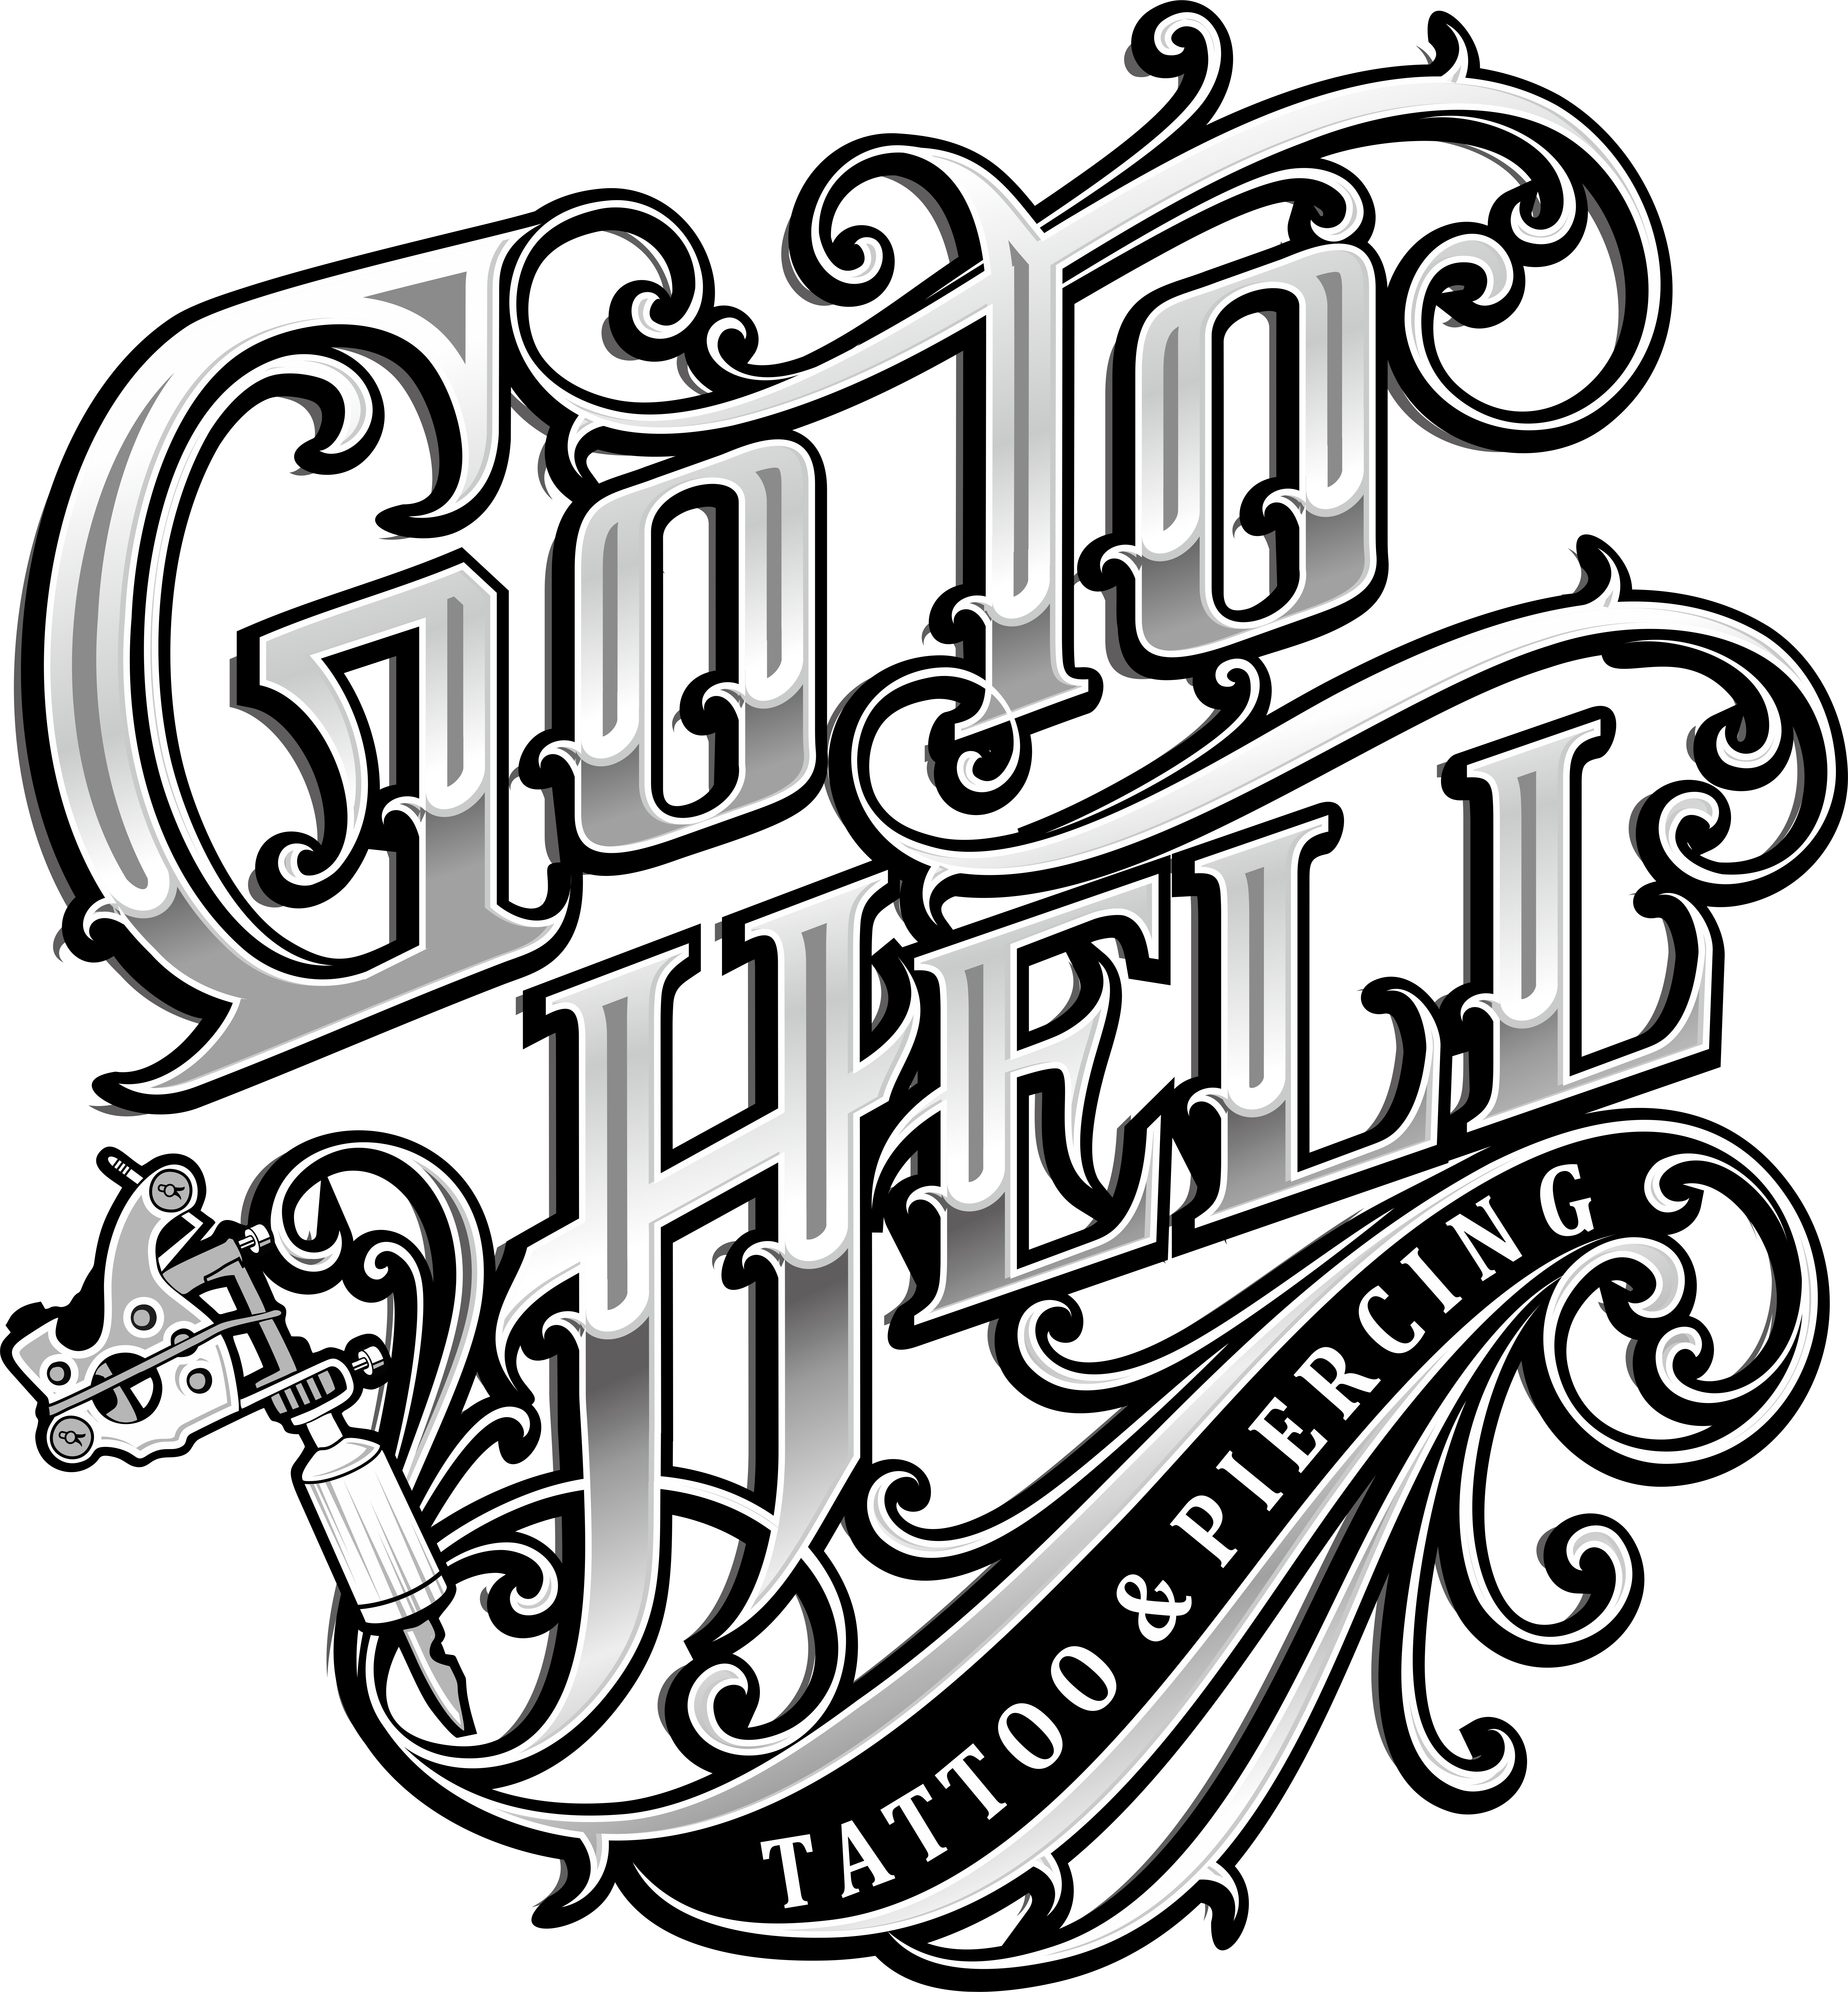 Go to hell – tattoo & piercing